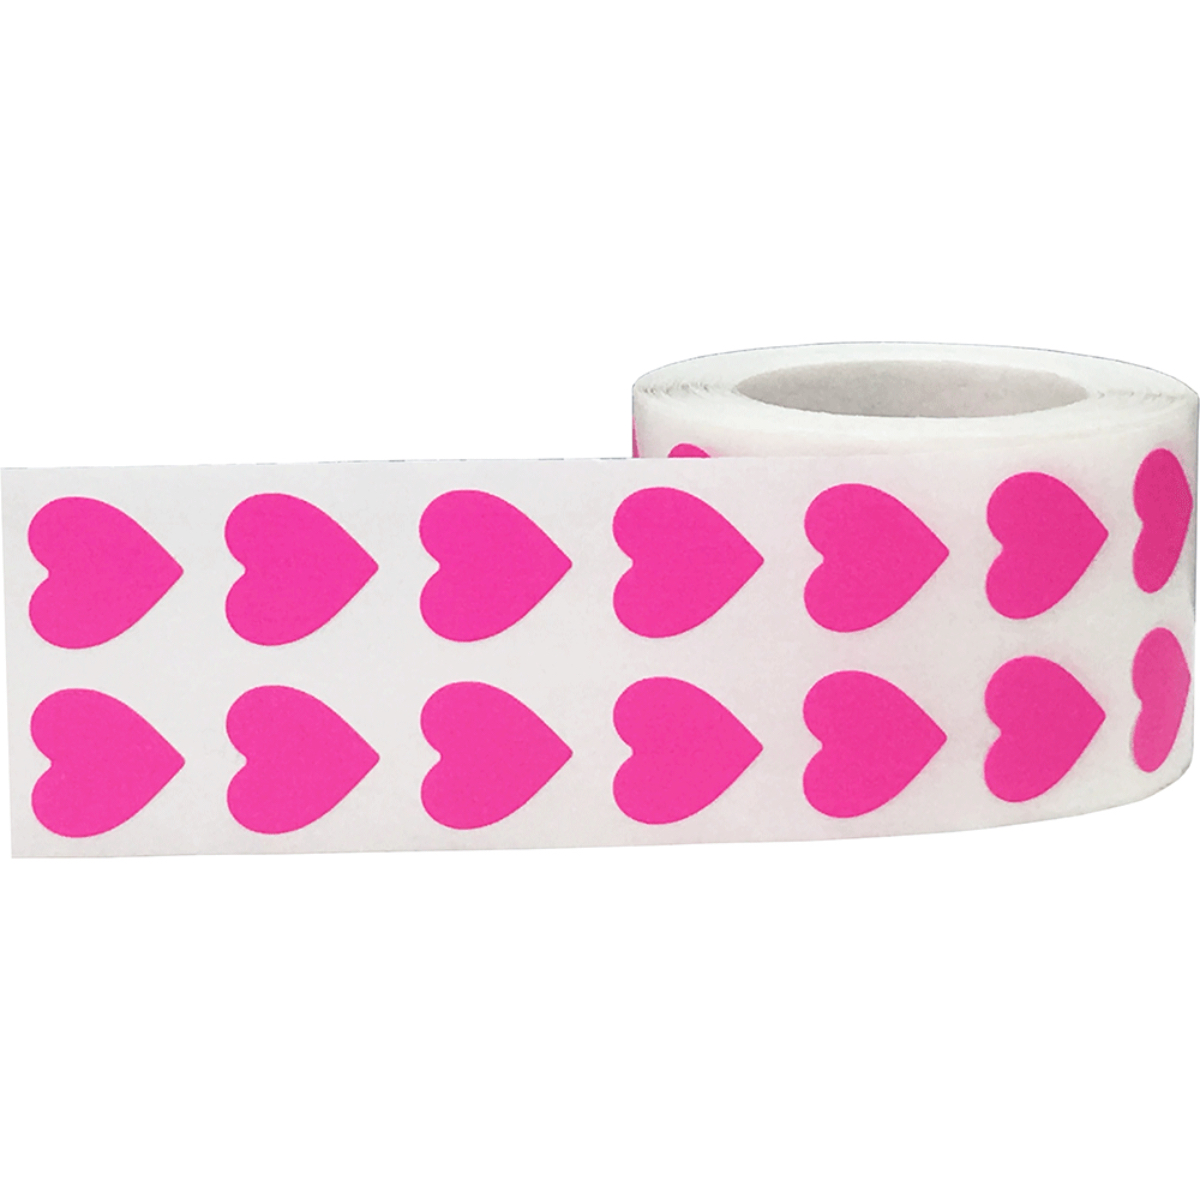 Small Hot Pink Heart Stickers 1/2 Wide